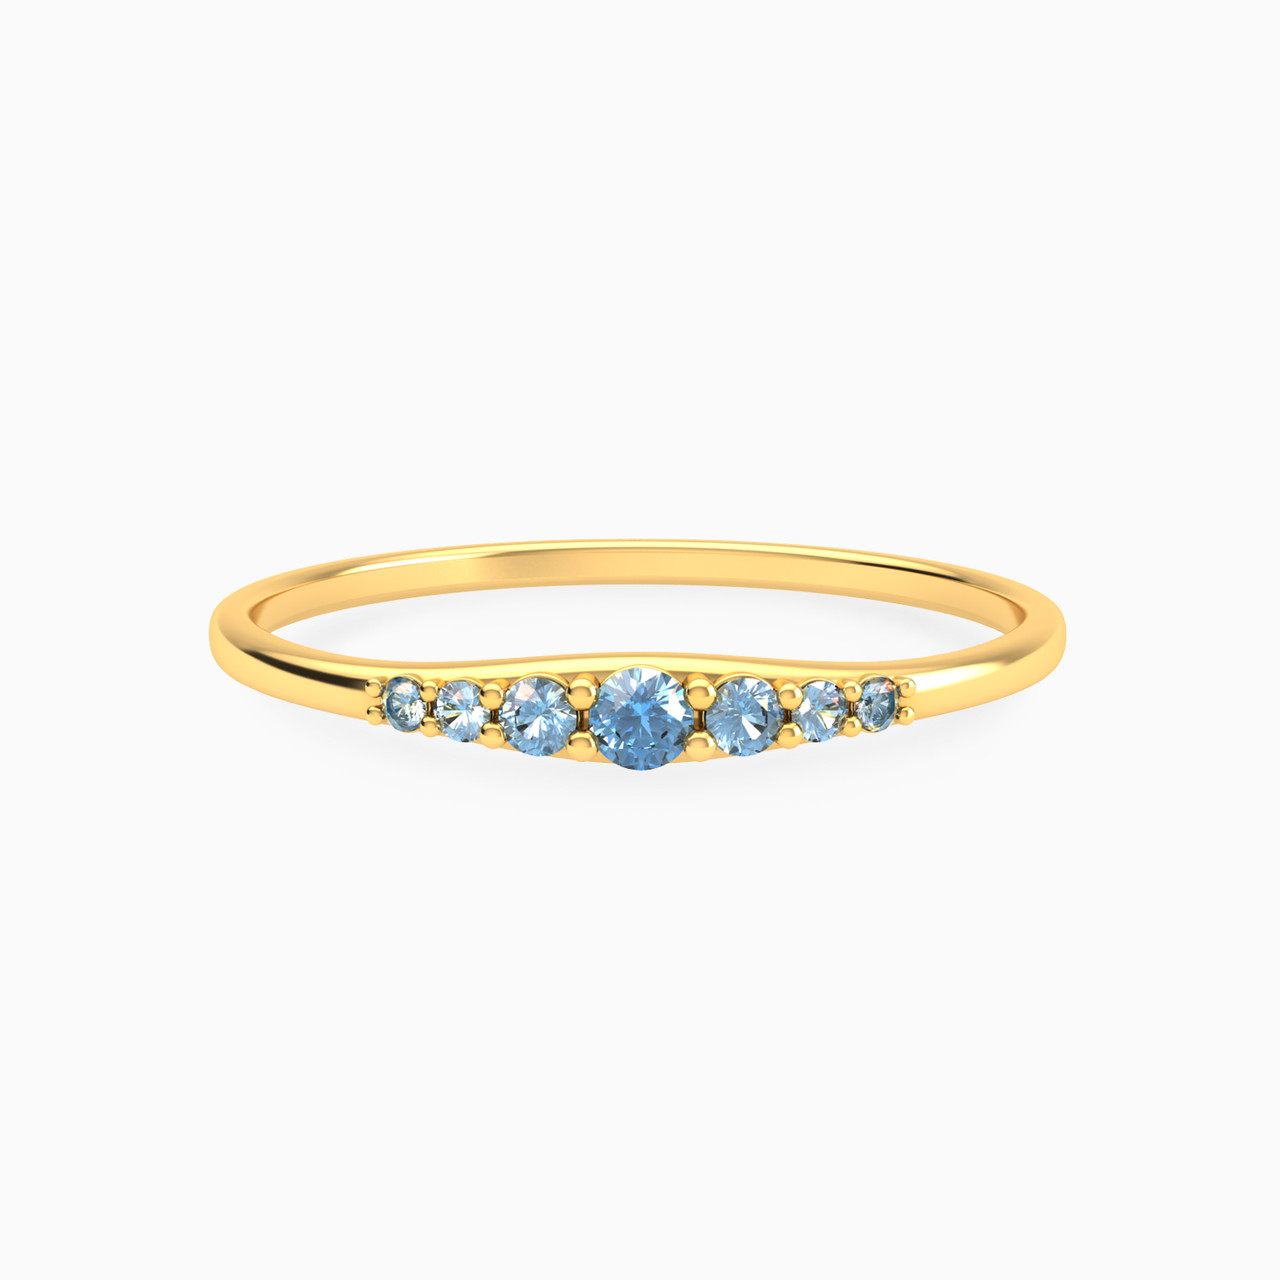 Round Shaped Colored Stones Statement Ring in 14K Gold 